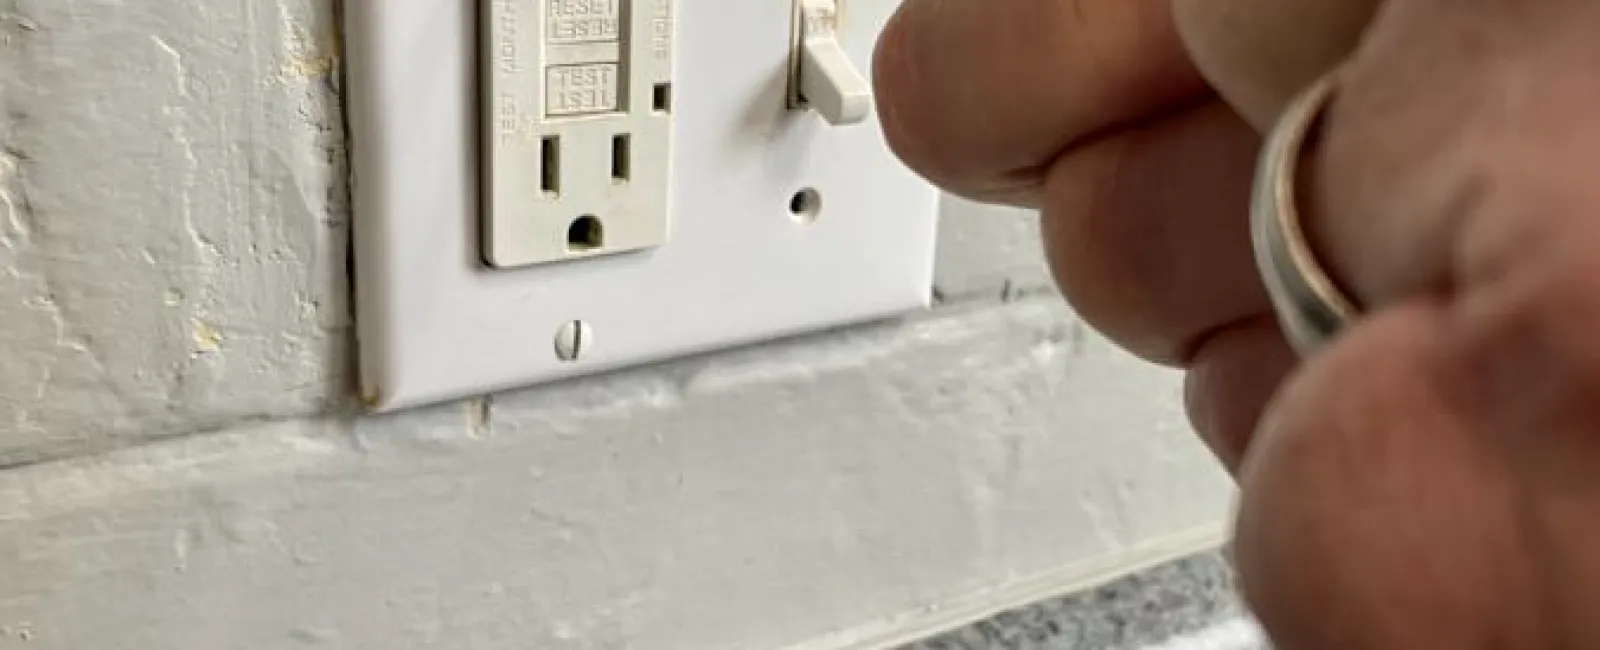 Checklist for New Homeowners to Inspect Outlets & Breakers